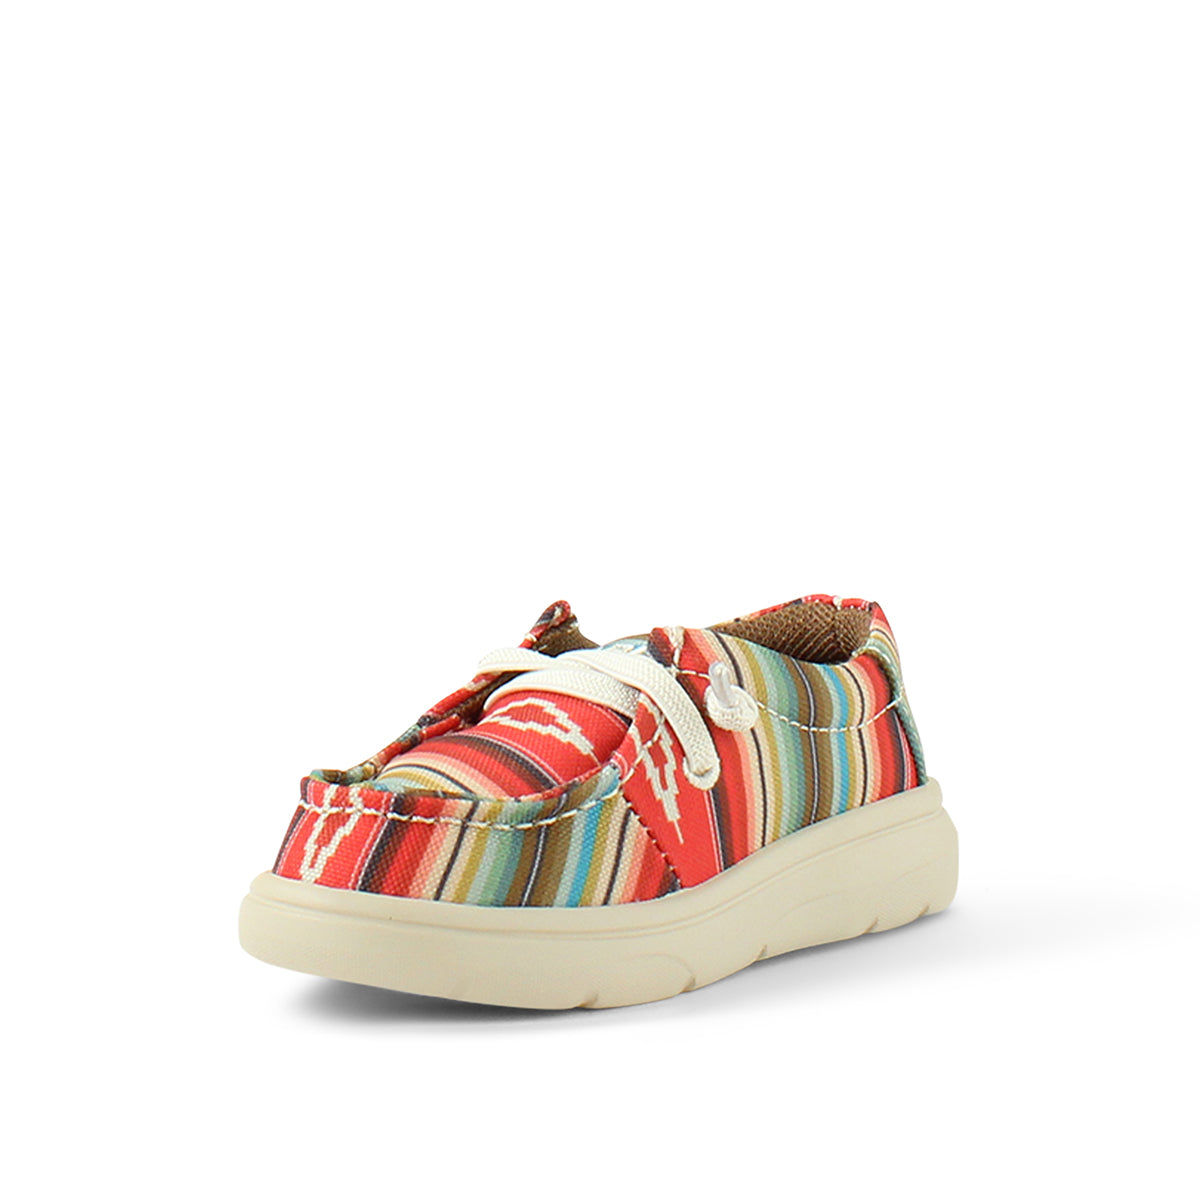 Ariat Toddler Lil' Stompers Serape Hilo Shoes - Pastel Multi